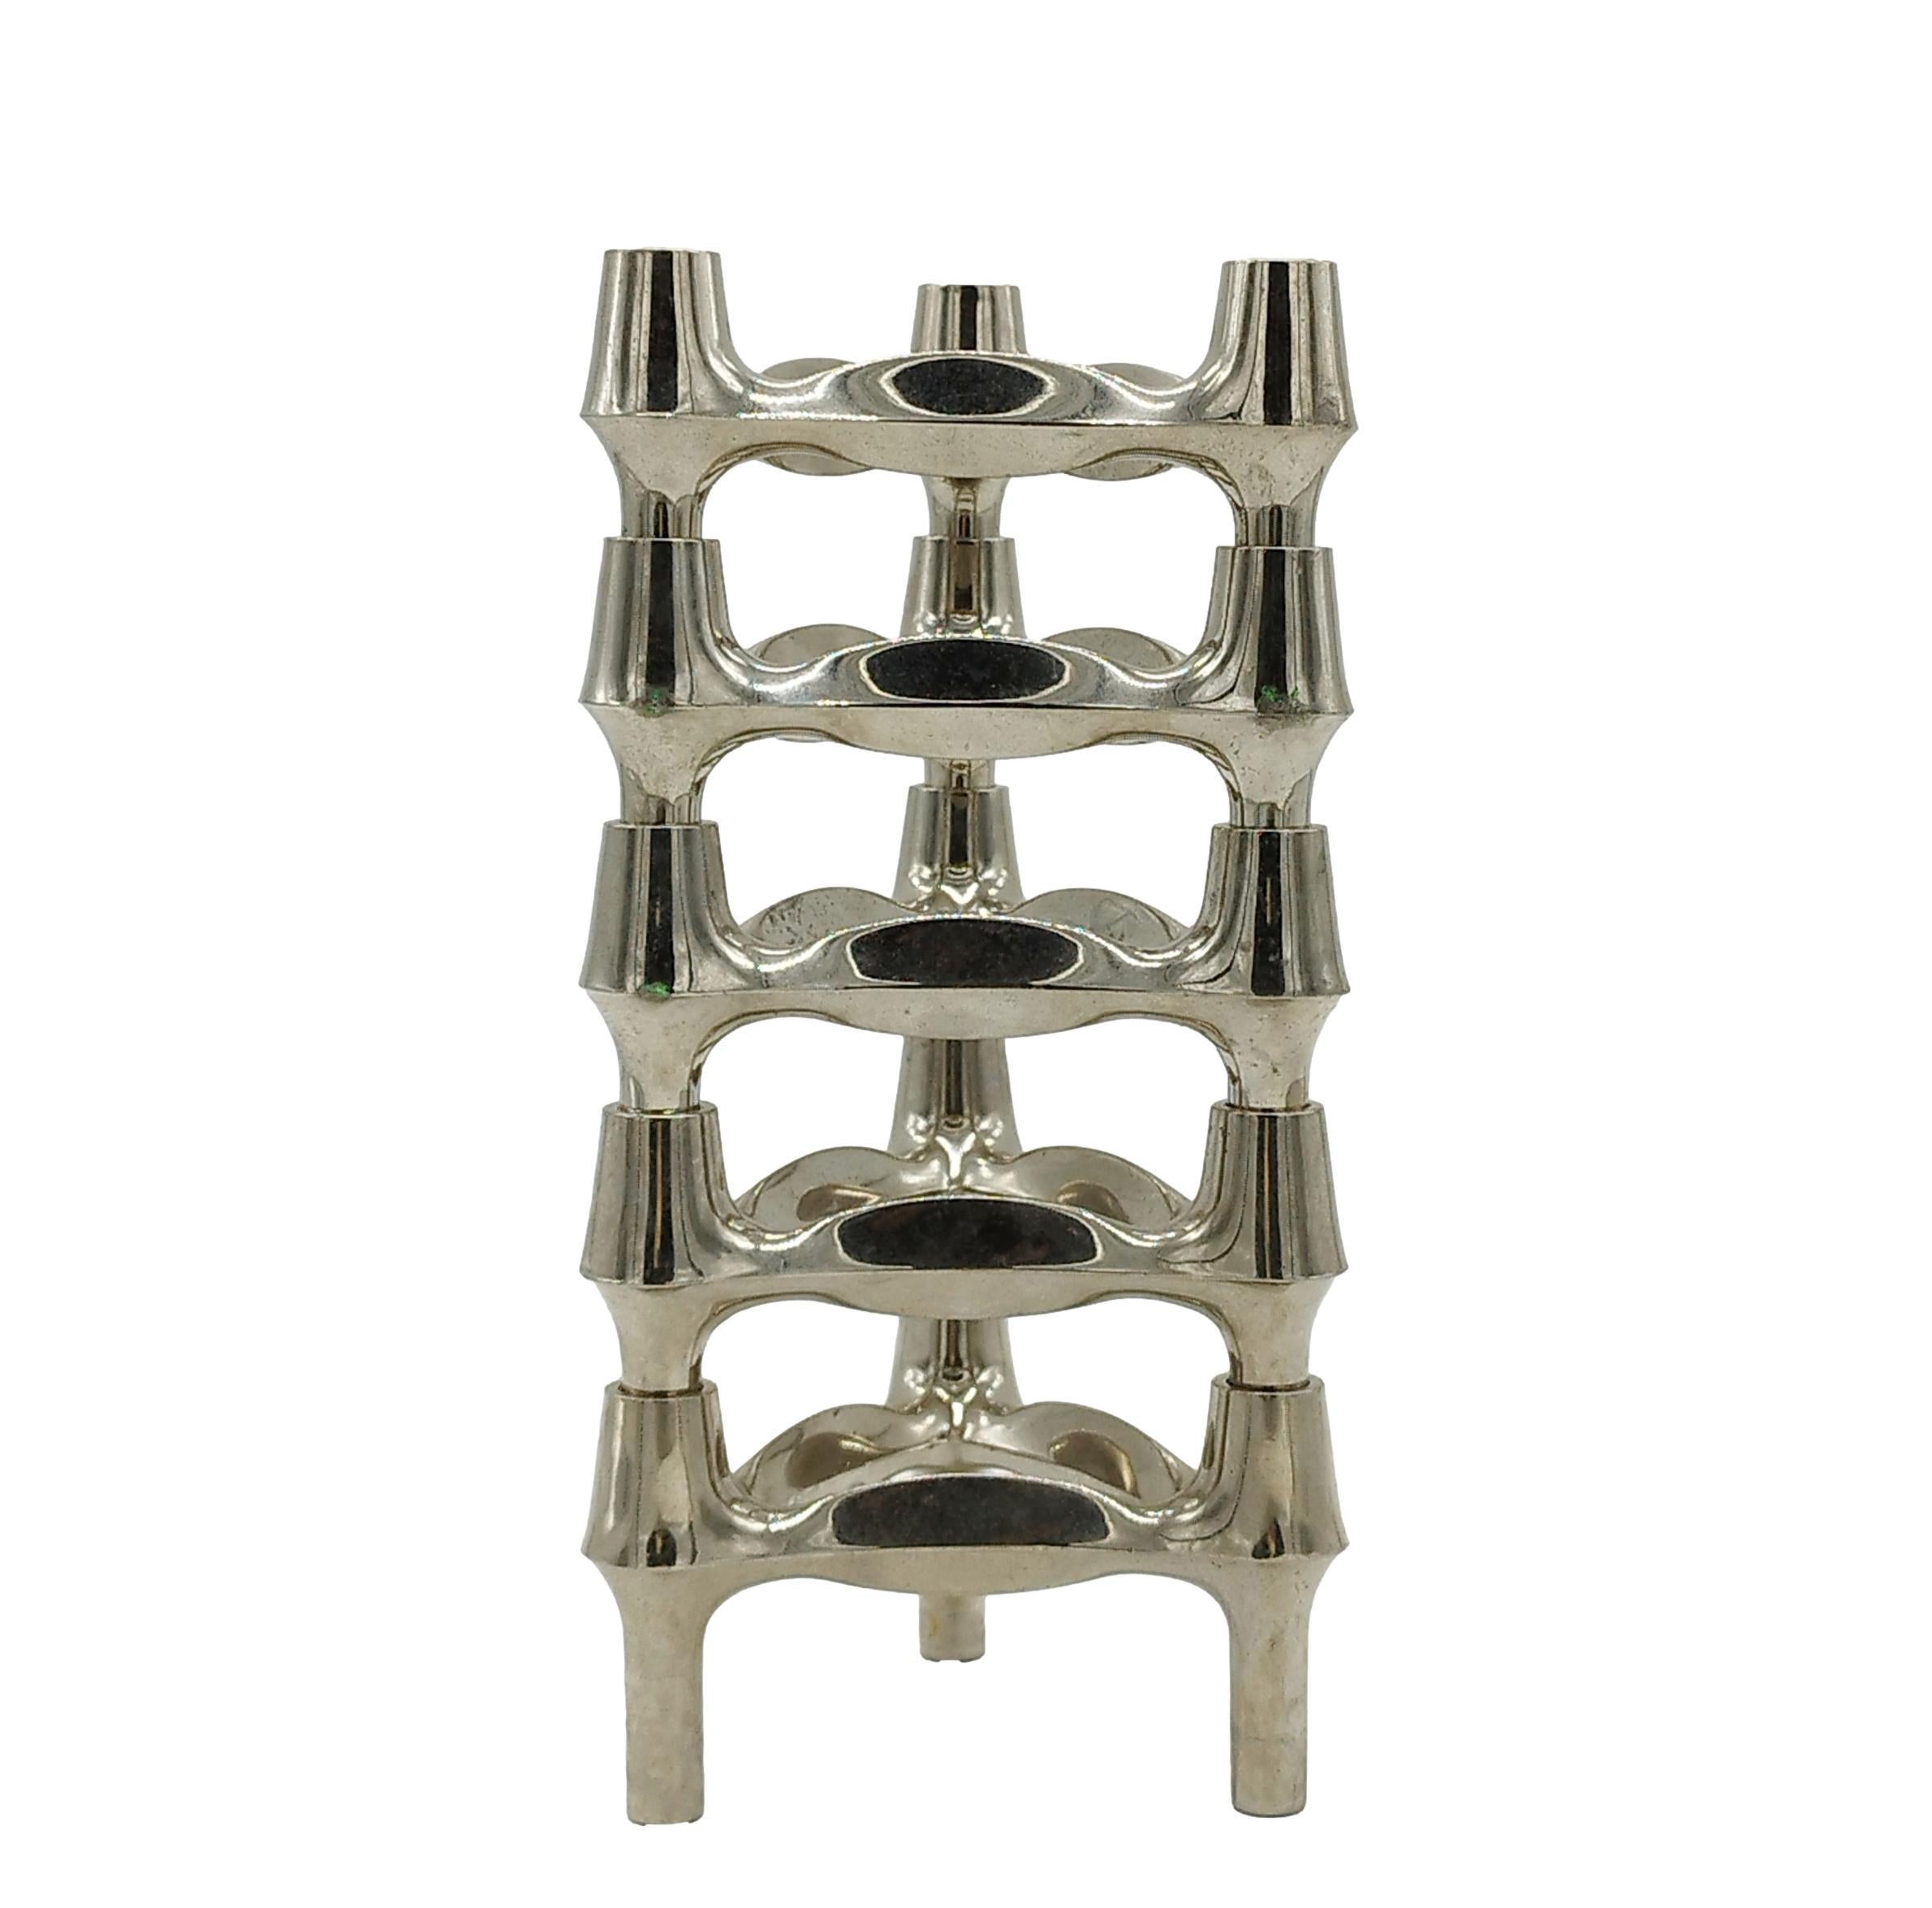 Modular stackable candleholders by BMF Quist Nagel, the candleholders were designed by Ceasar Stoffi and Fritz Nagel and produced by BMF (Bayerische Metallwaren Fabrik) in West Germany in the 1970s.
In very good vintage condition, some minor wear.